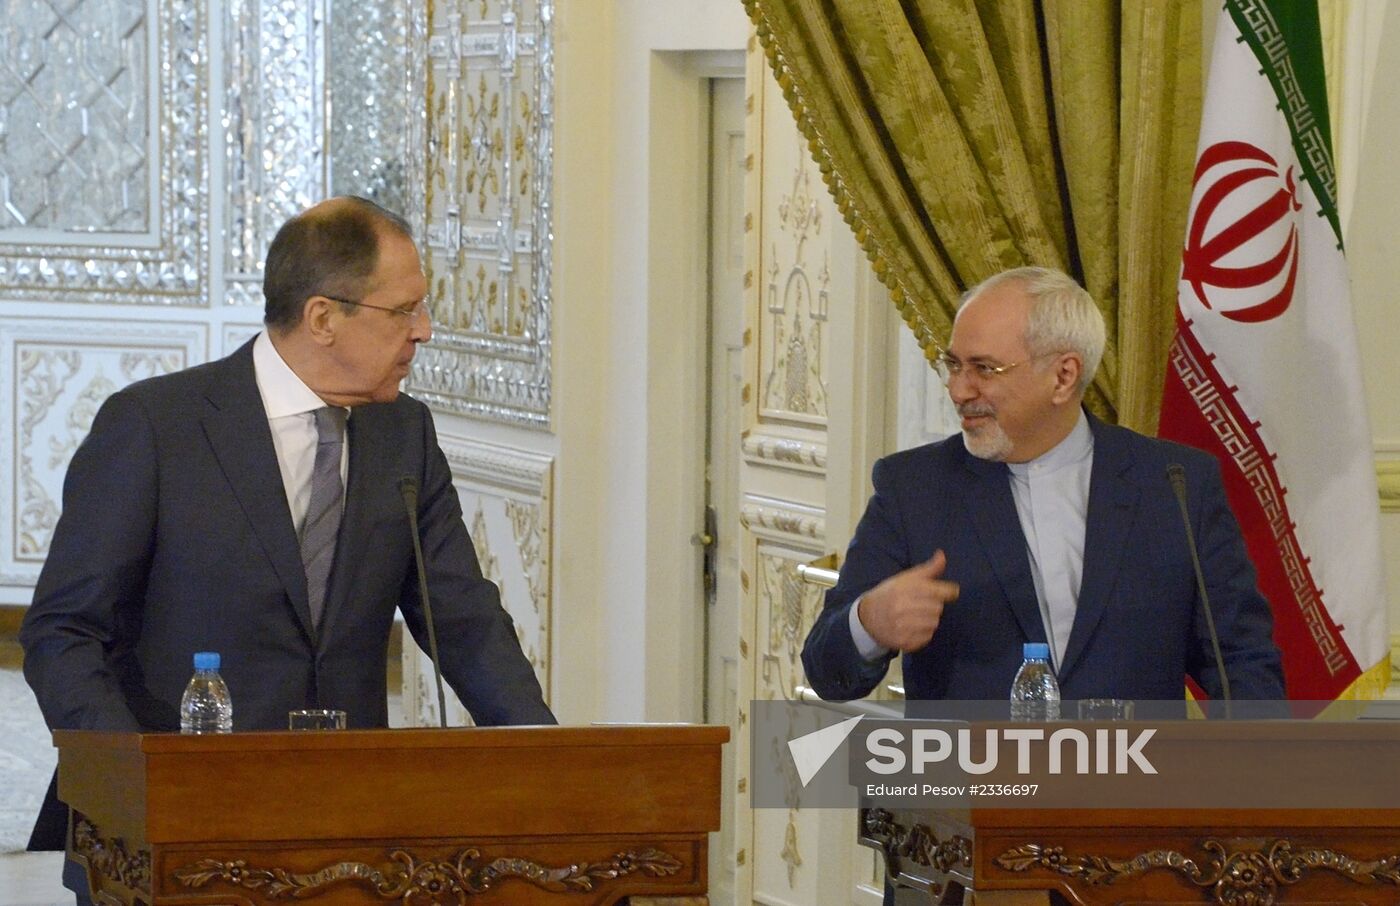 Russian Foreign Minister Sergey Lavrov visits Iran